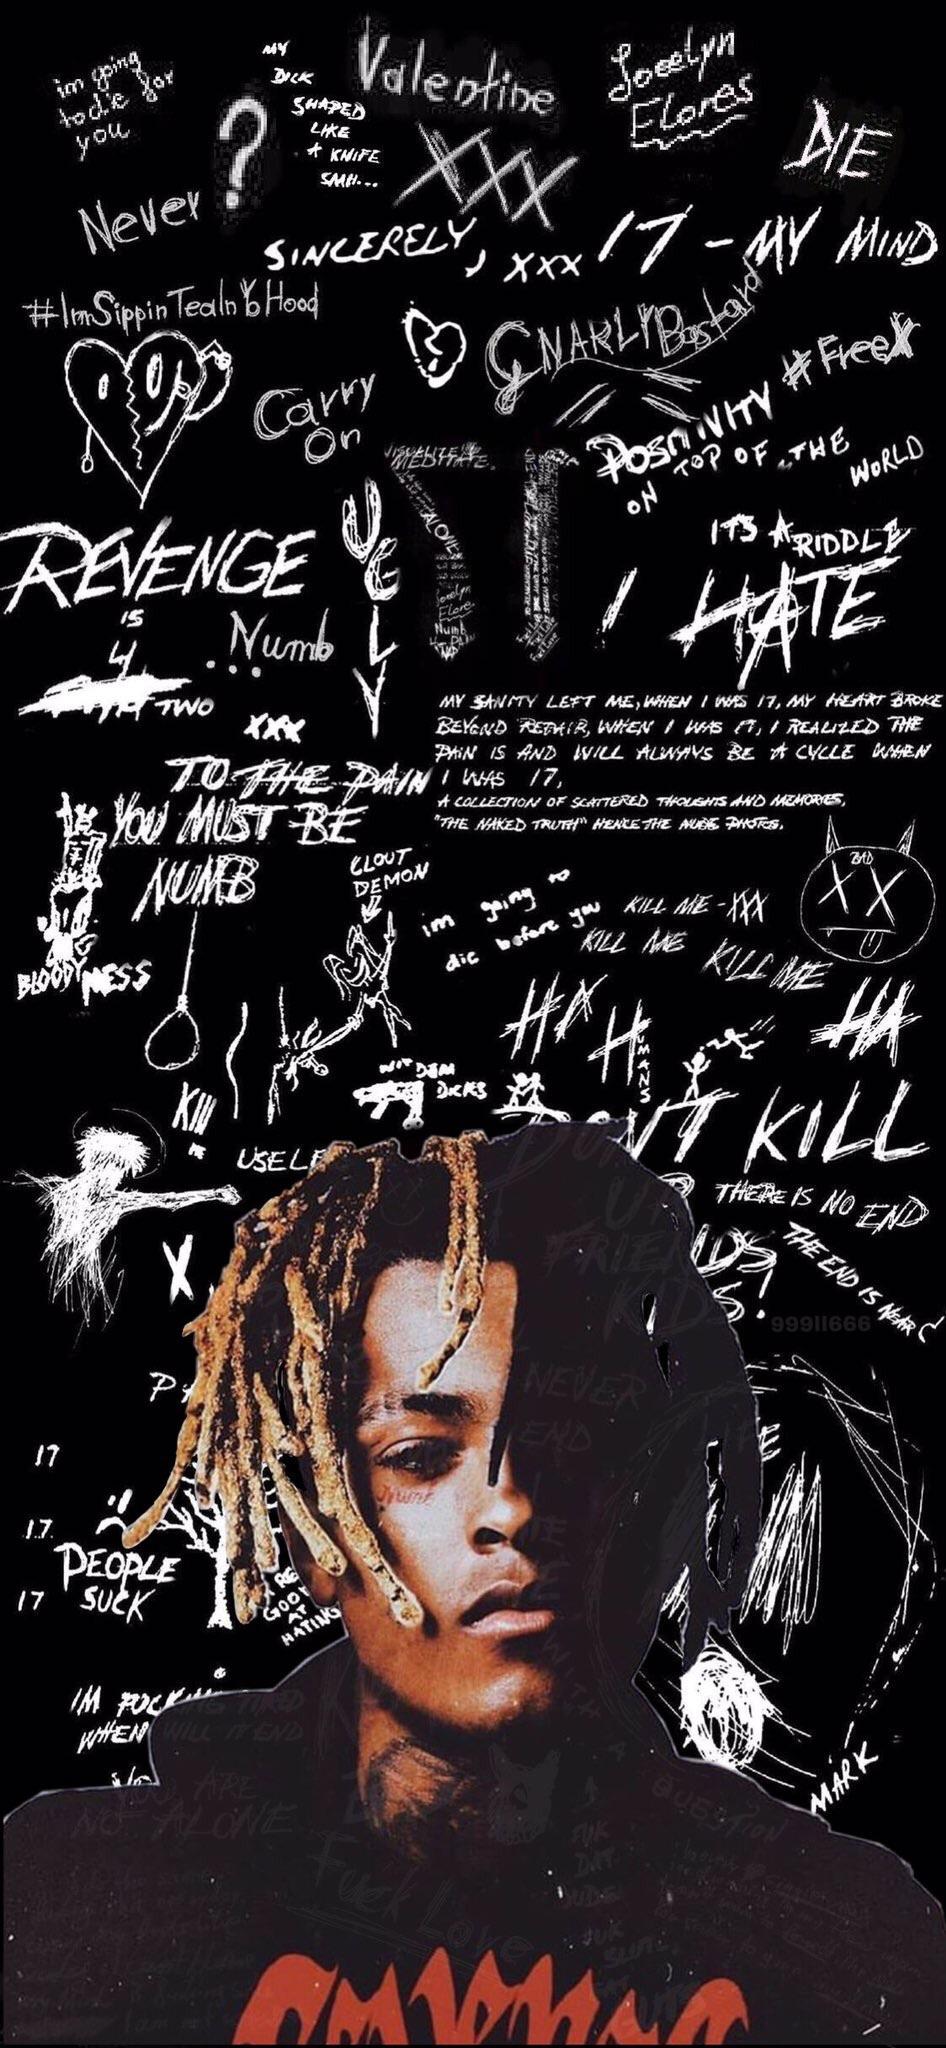 Dope wallpaper with the new X photo